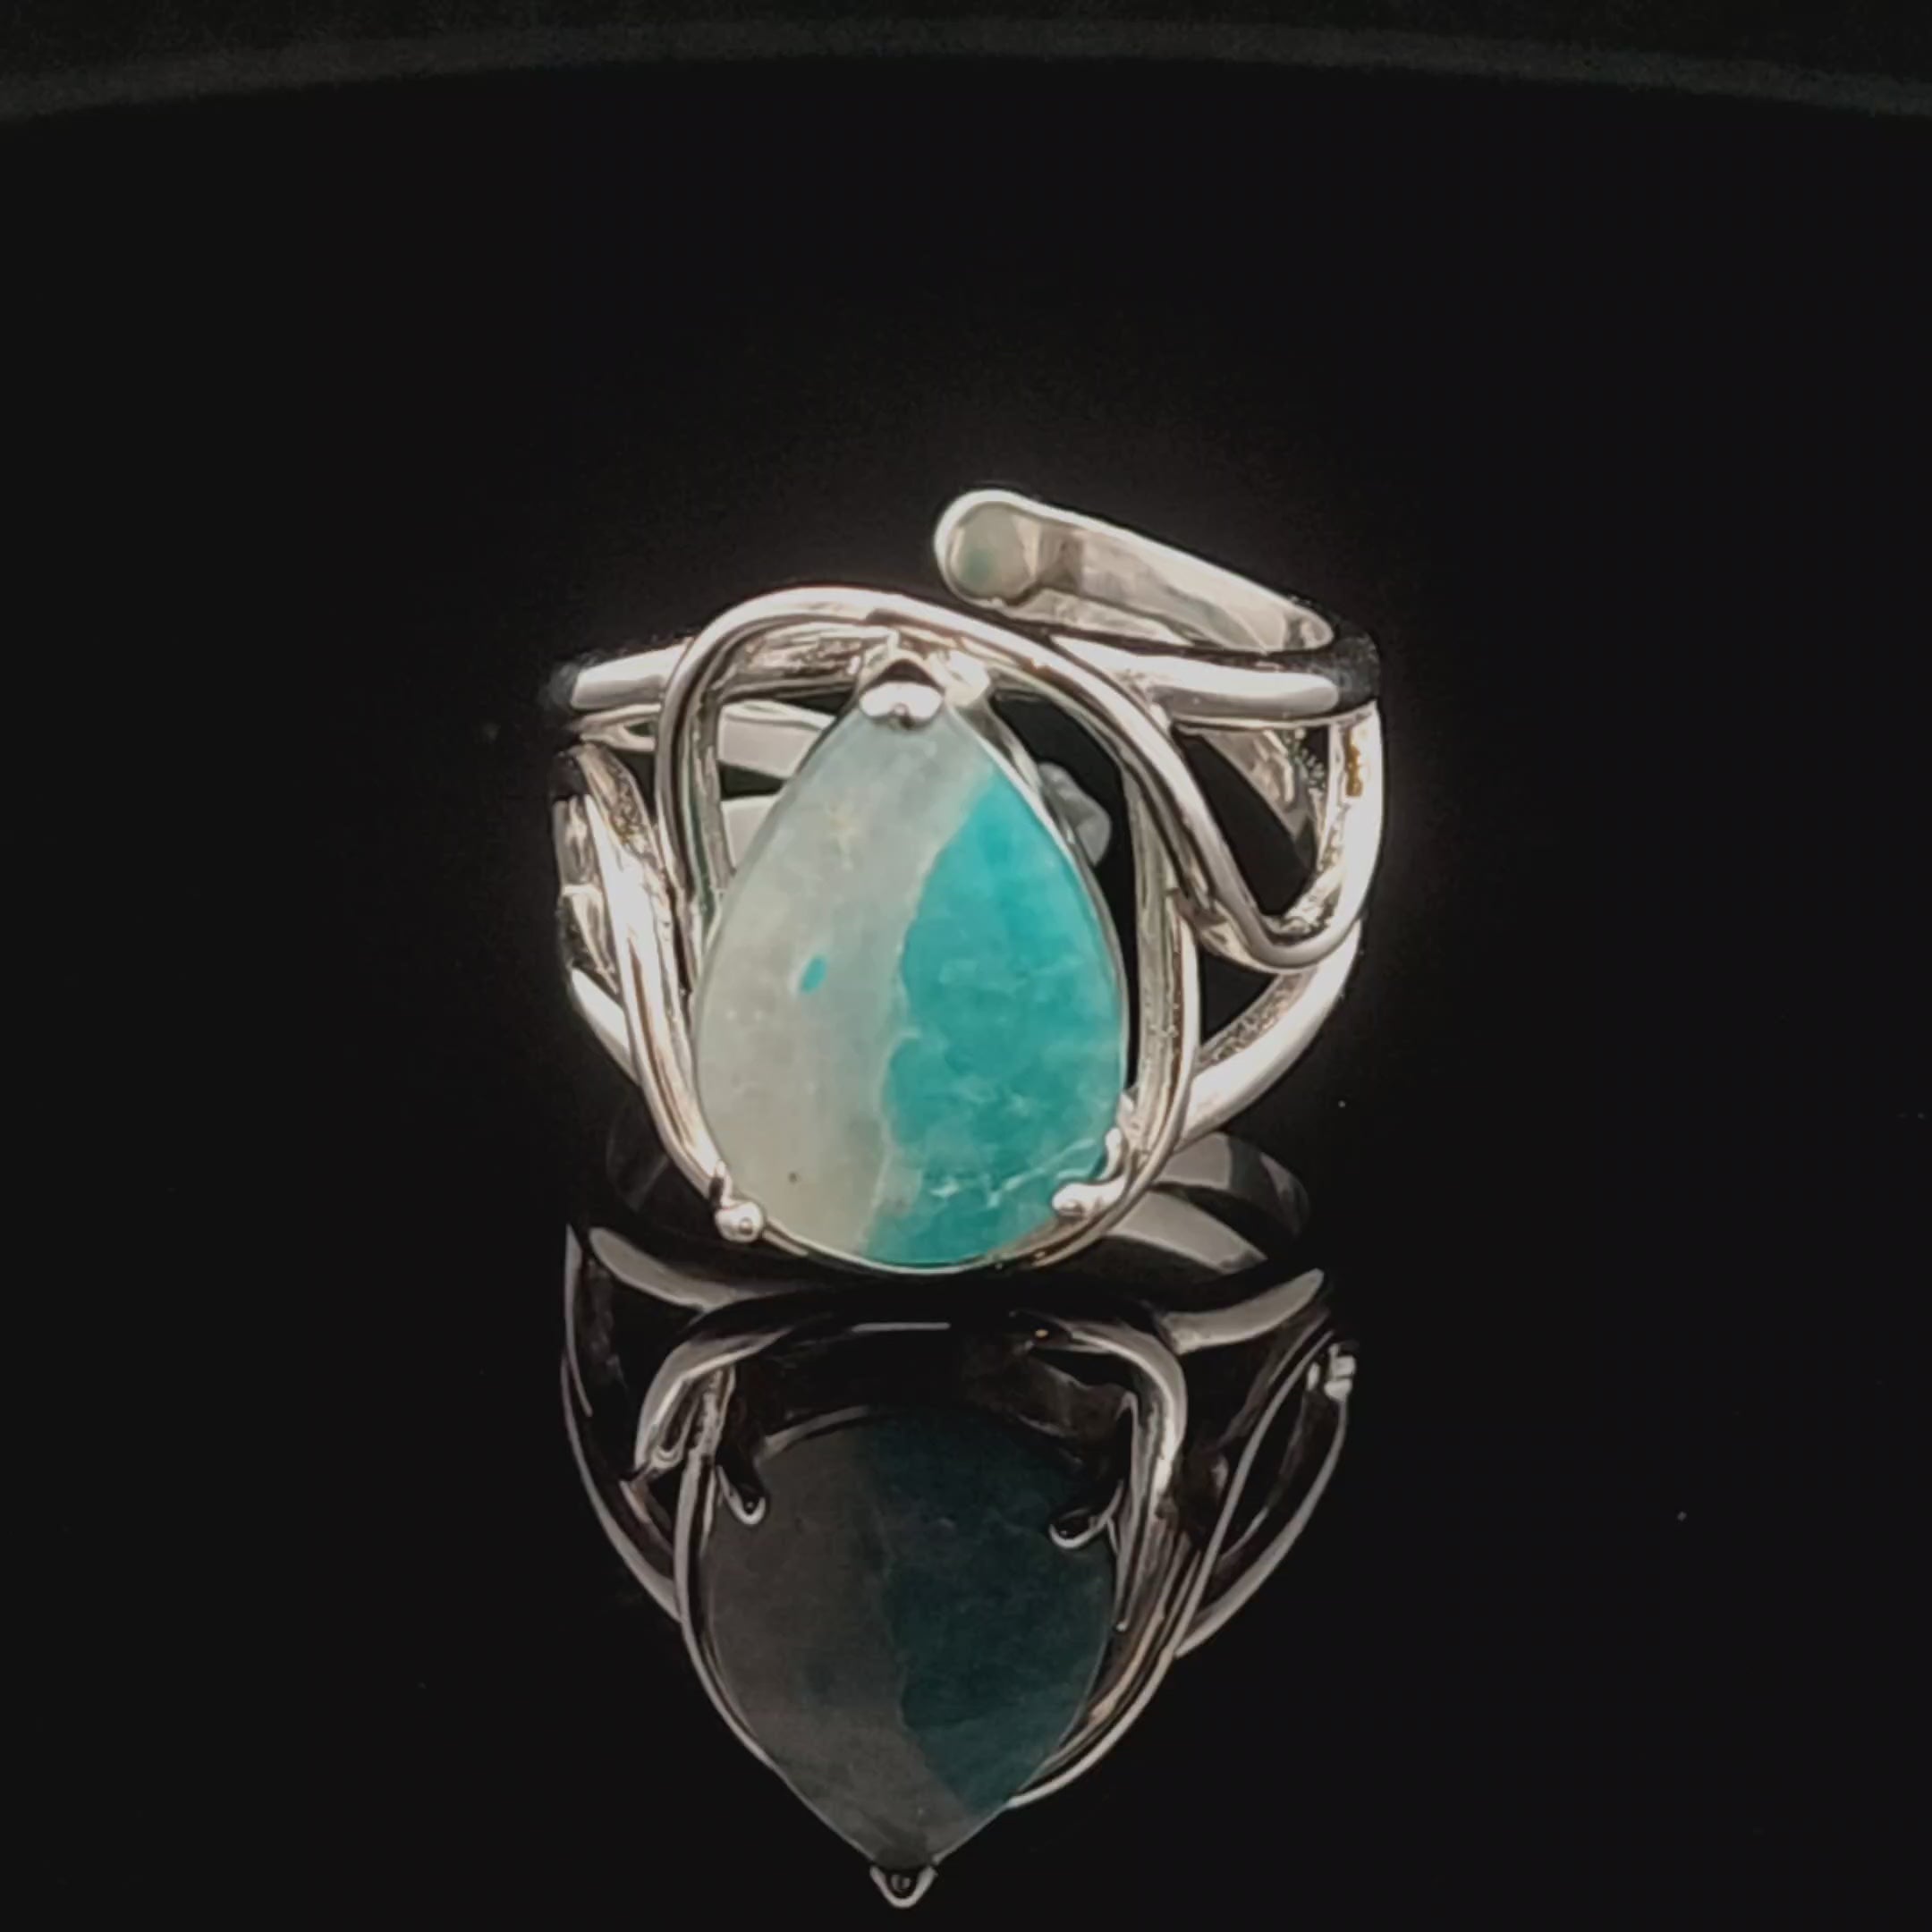 Amazonite in Quartz Adjustable Finger Cuff Ring .925 Silver (High Quality) for Speaking your Truth